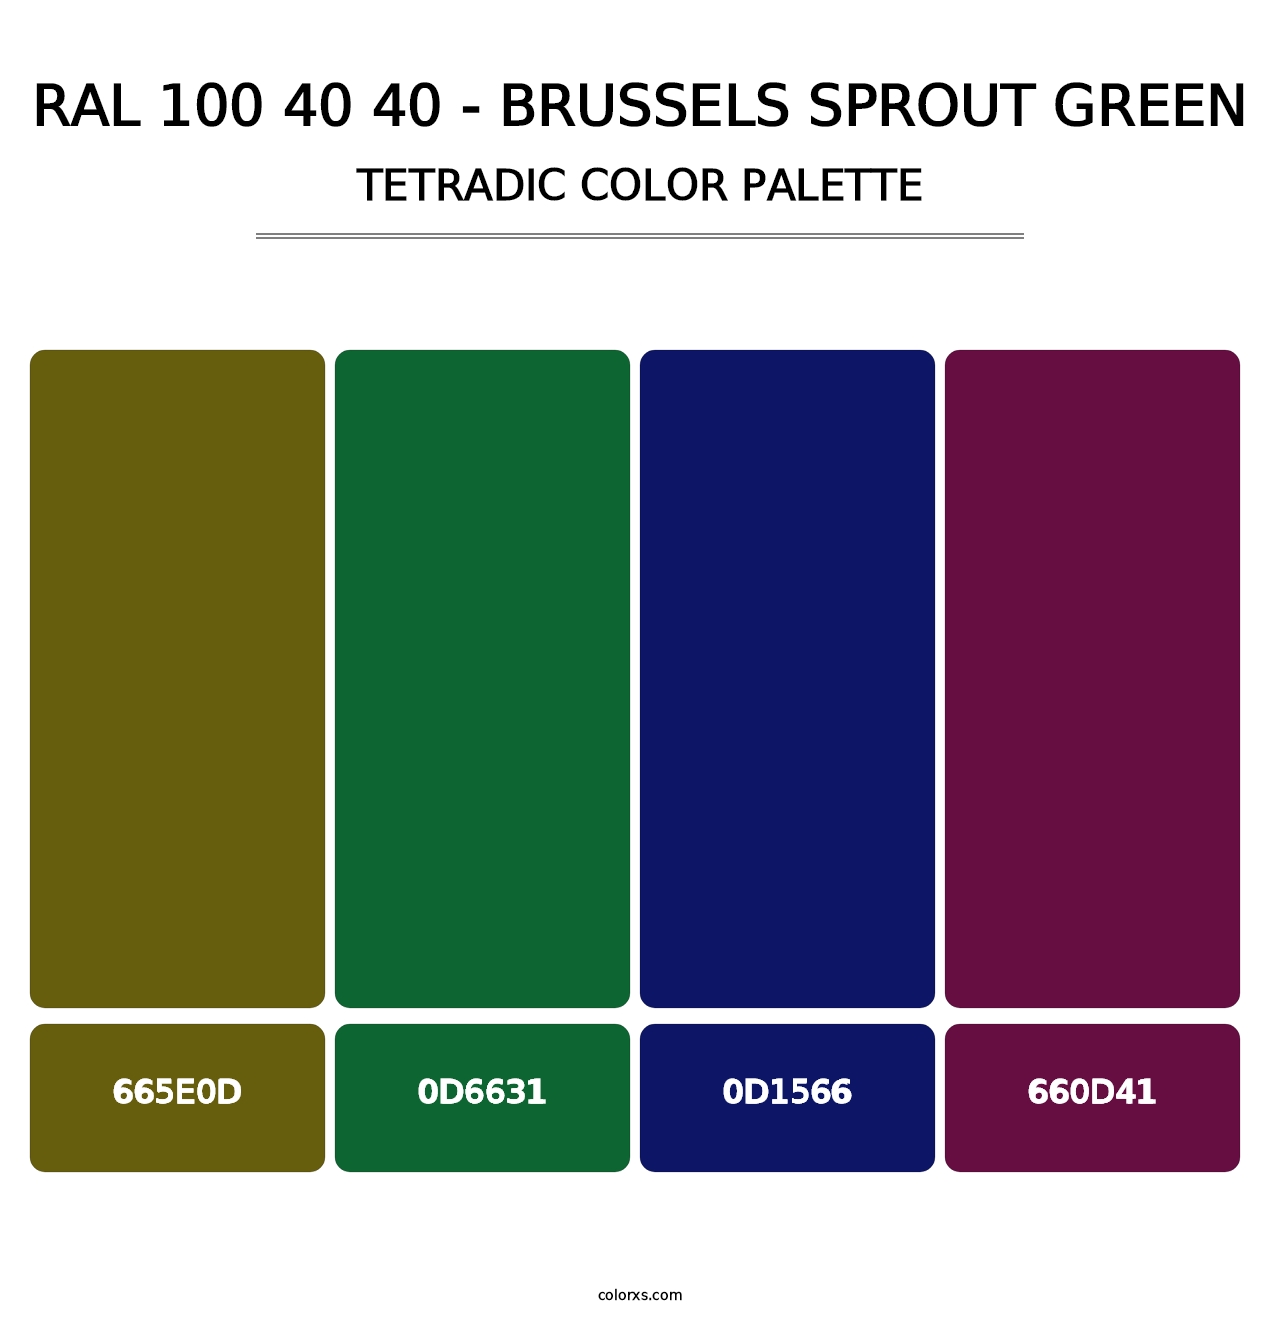 RAL 100 40 40 - Brussels Sprout Green - Tetradic Color Palette